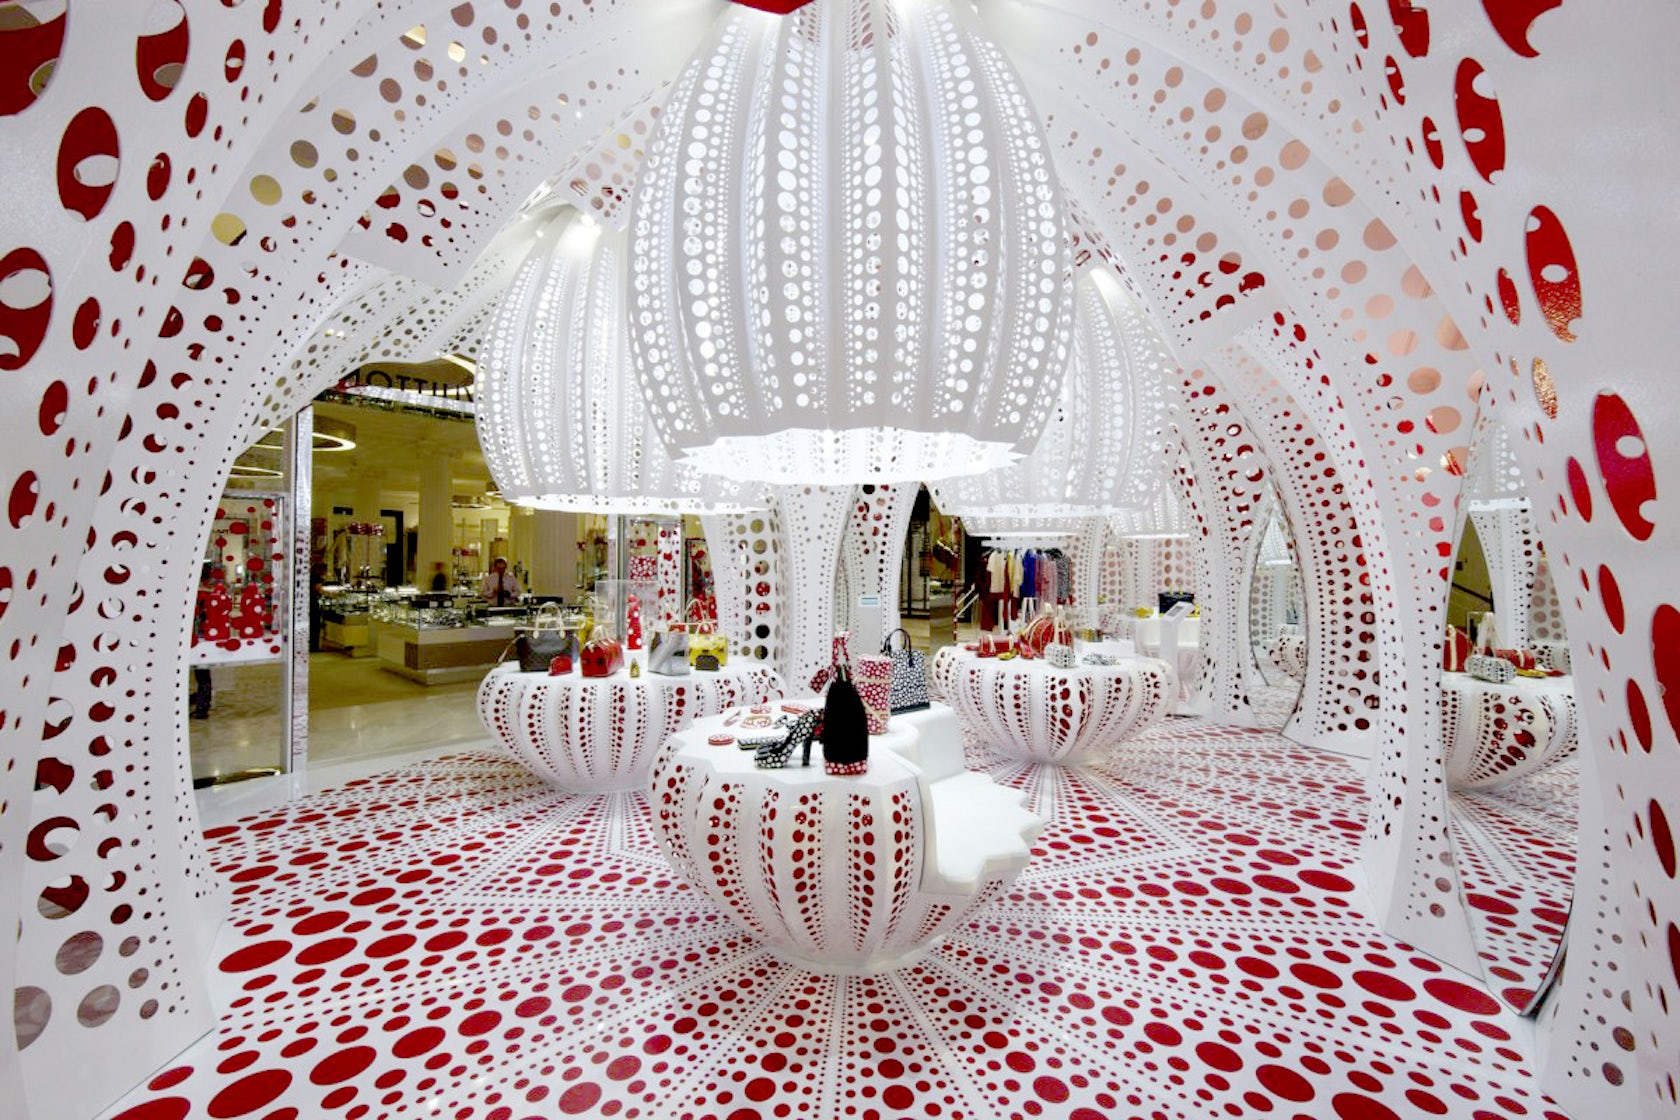 Installation of Yayoi Kusama's mannequin covers the exterior of the Louis  Vuitton's store in Paris